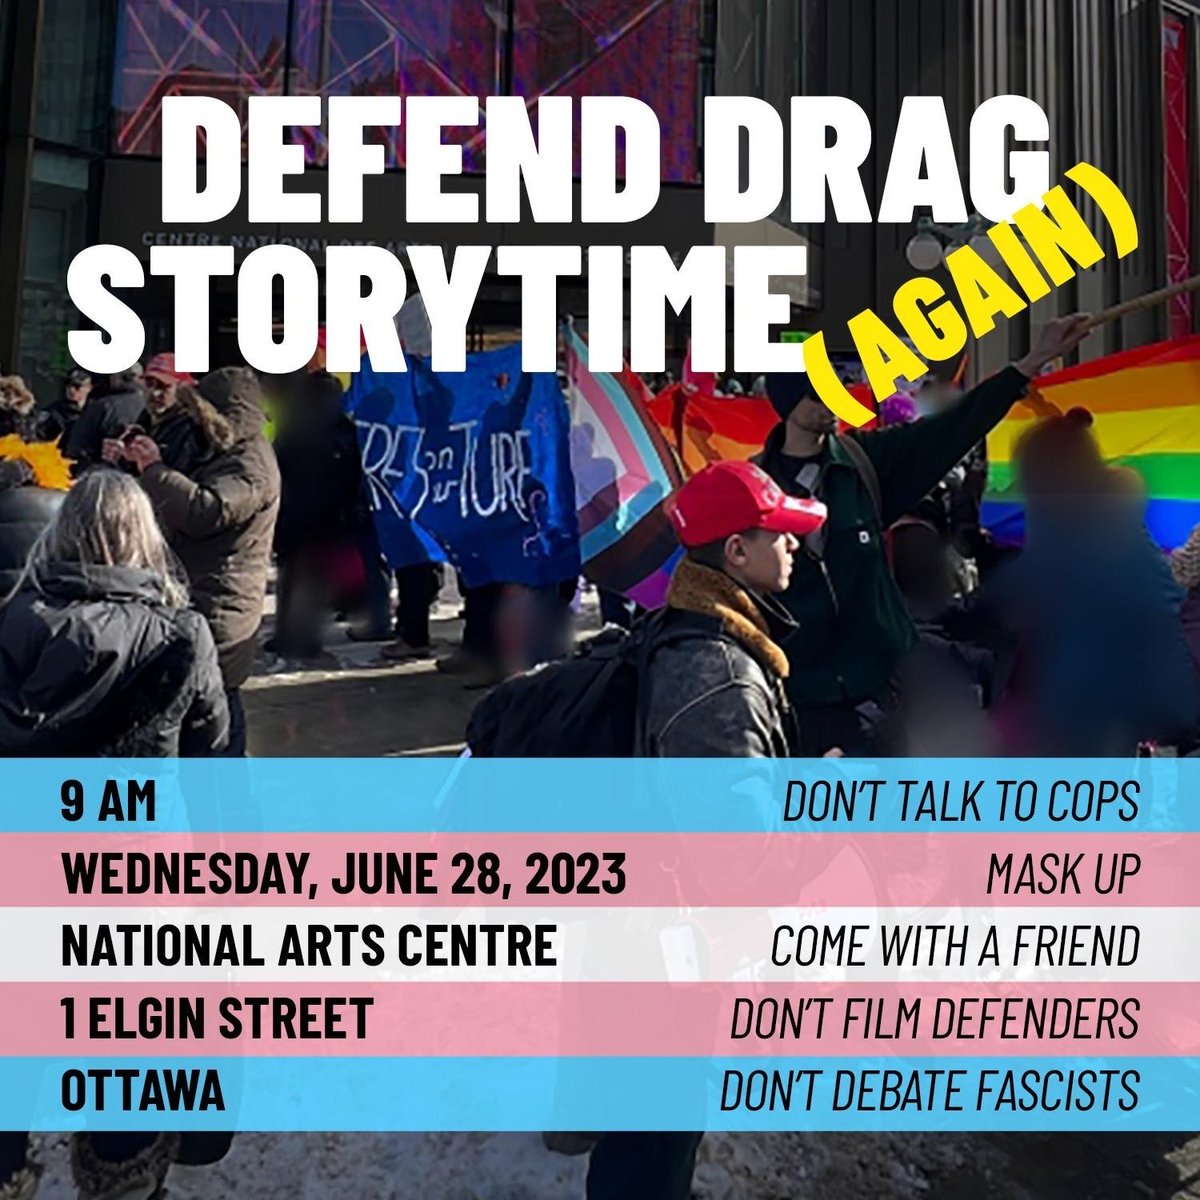 #Ottawa CALL TO ACTION: DEFEND DRAG STORY TIME

Wednesday, June 28
9:00 am
National Arts Centre, 1 Elgin St